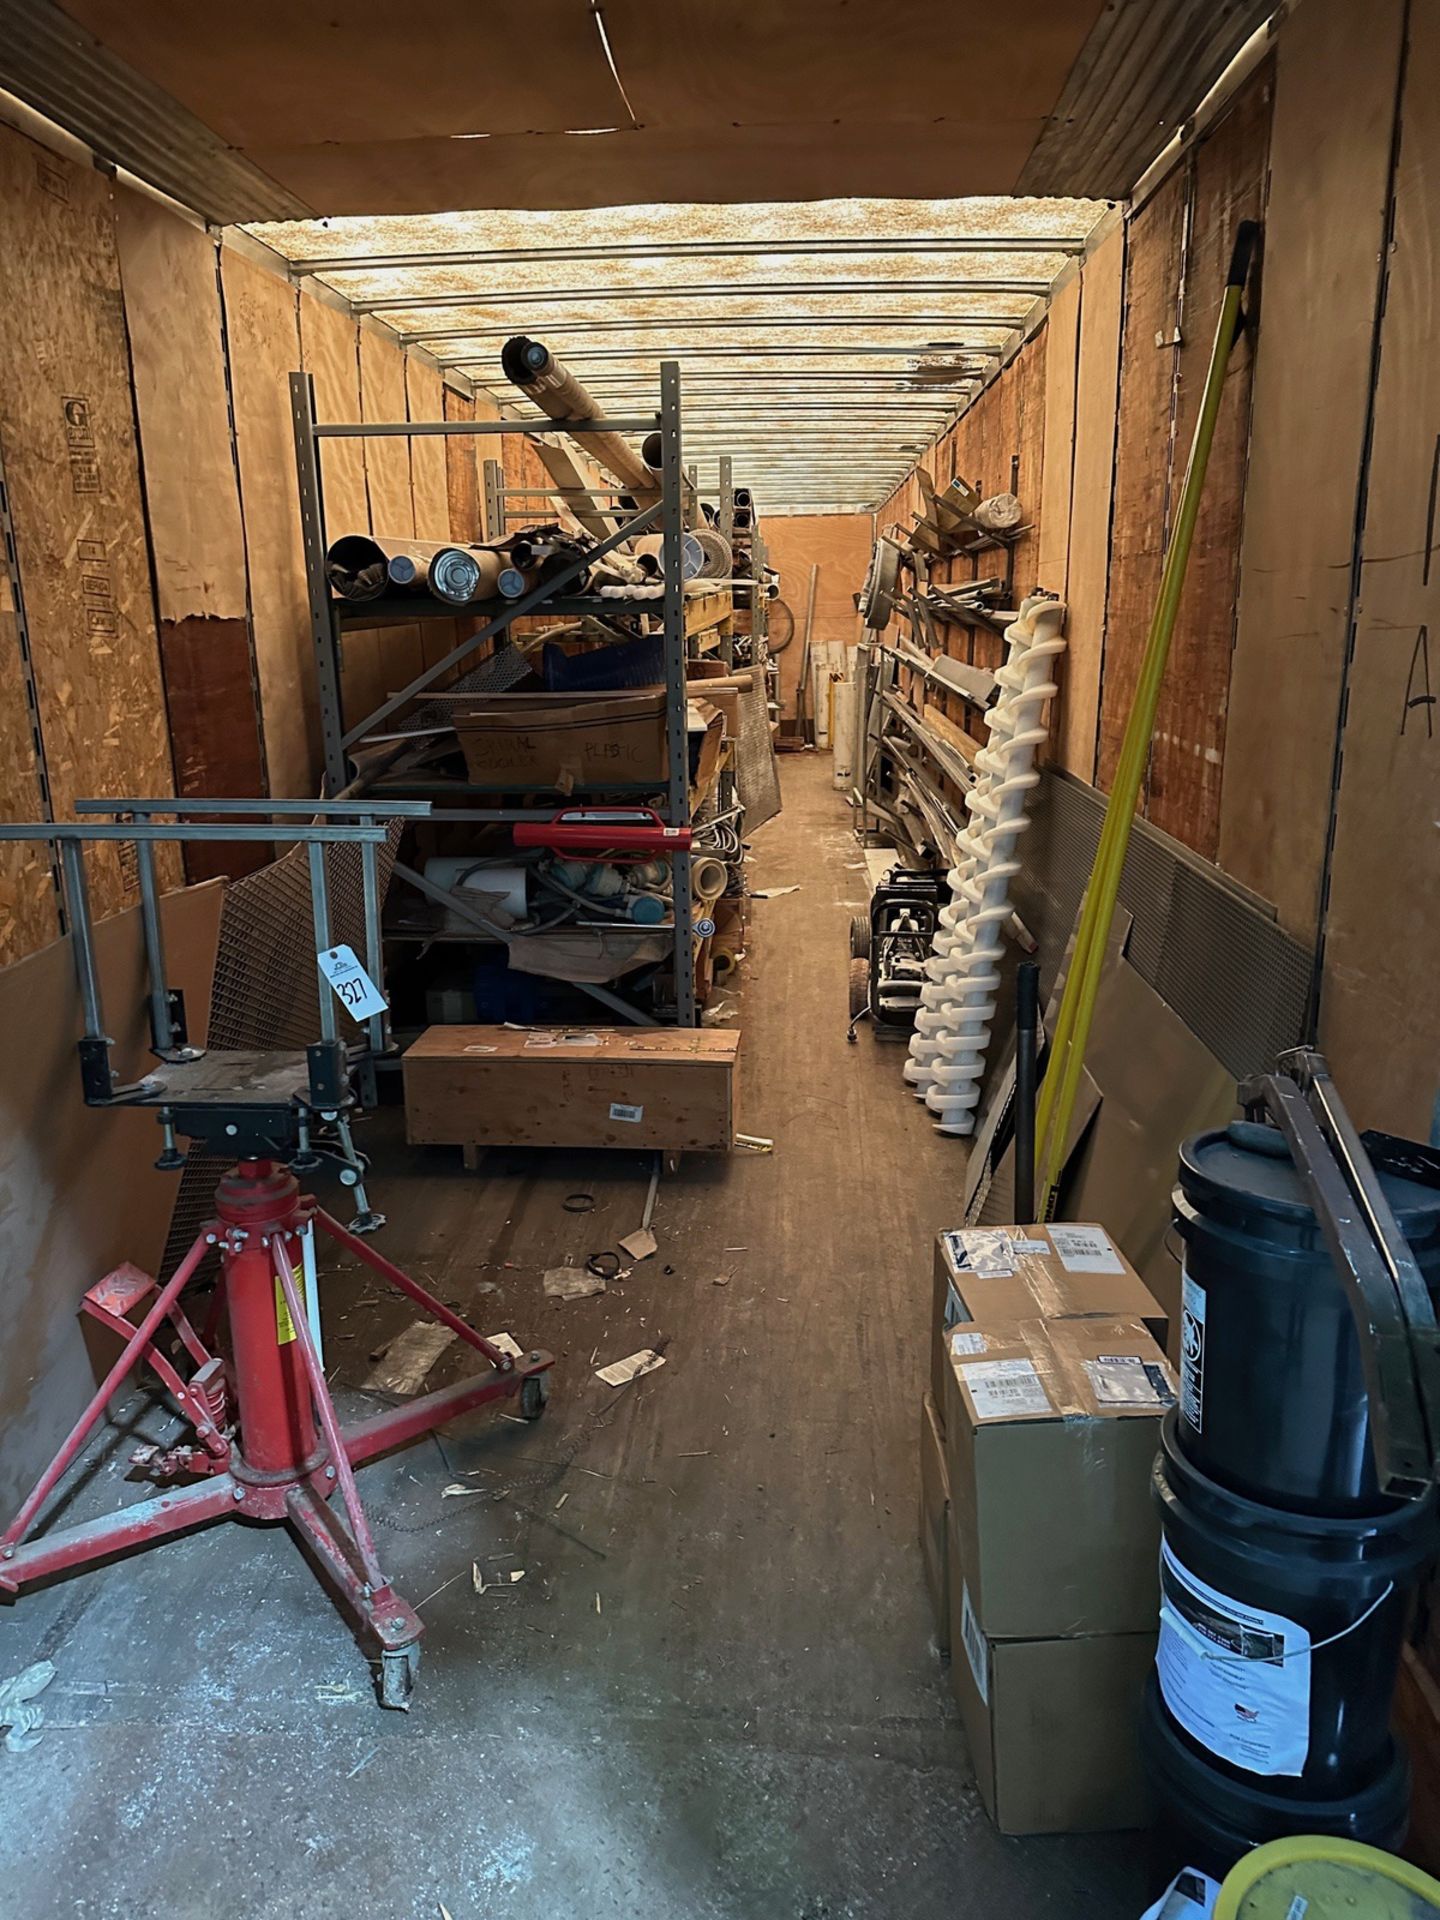 Lot of Trailer Contents and Shelving Units | Rig Fee $750